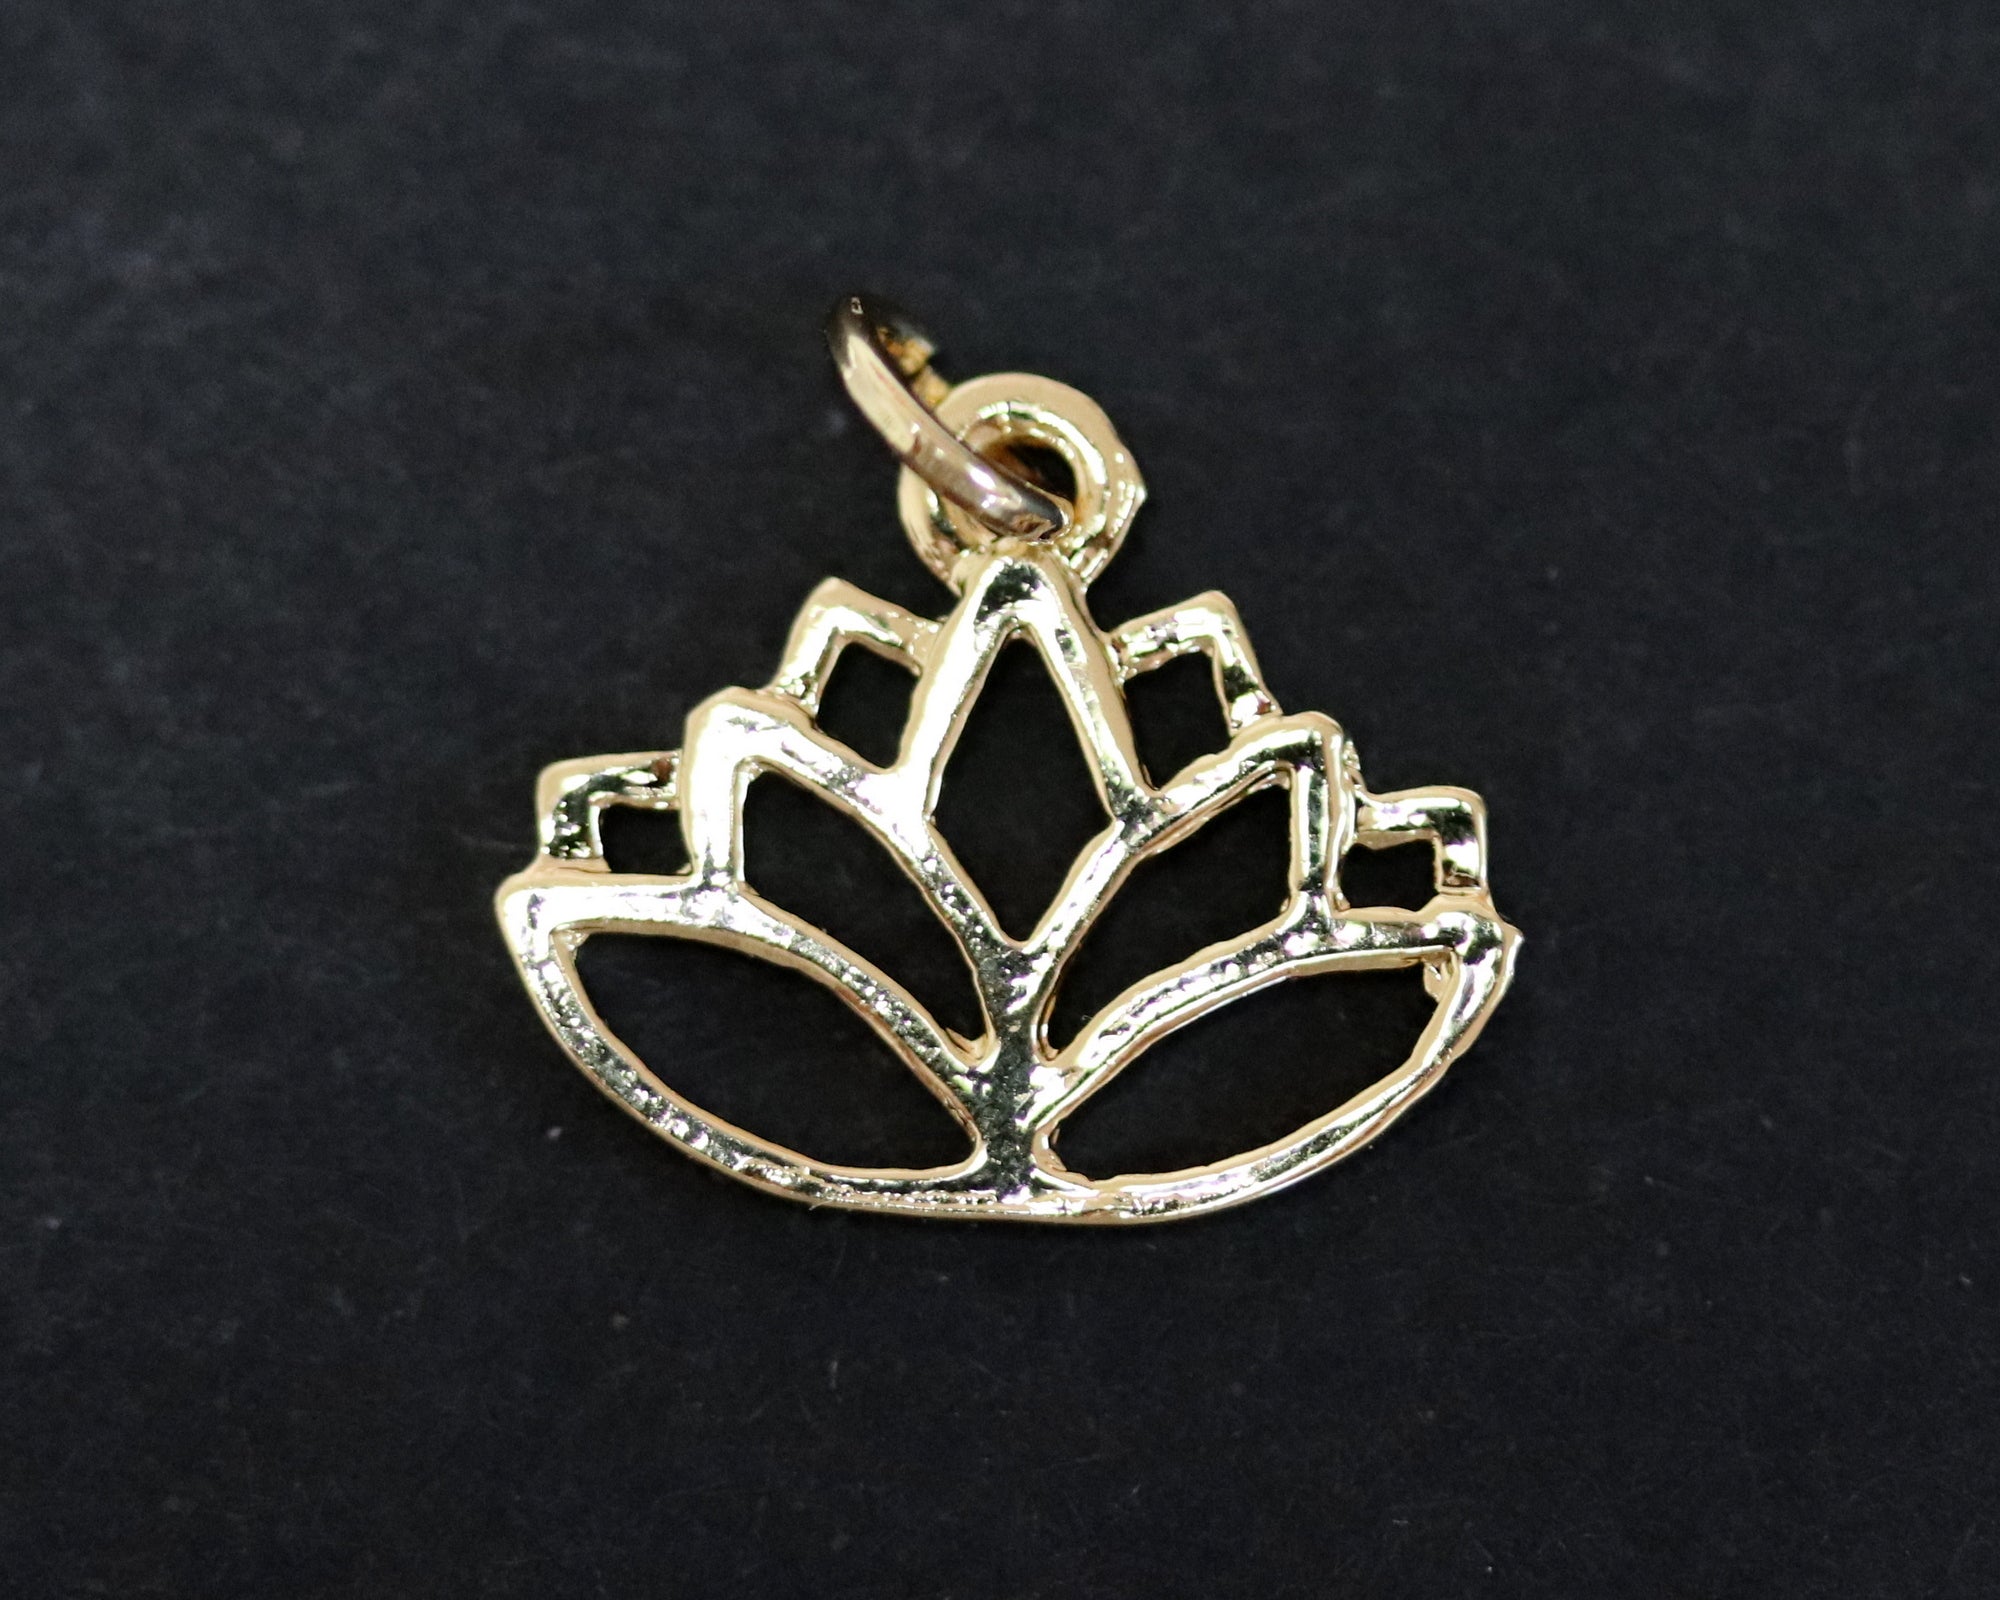 Lotus charm 14x16mm 14K Gold plated metal alloy pendant